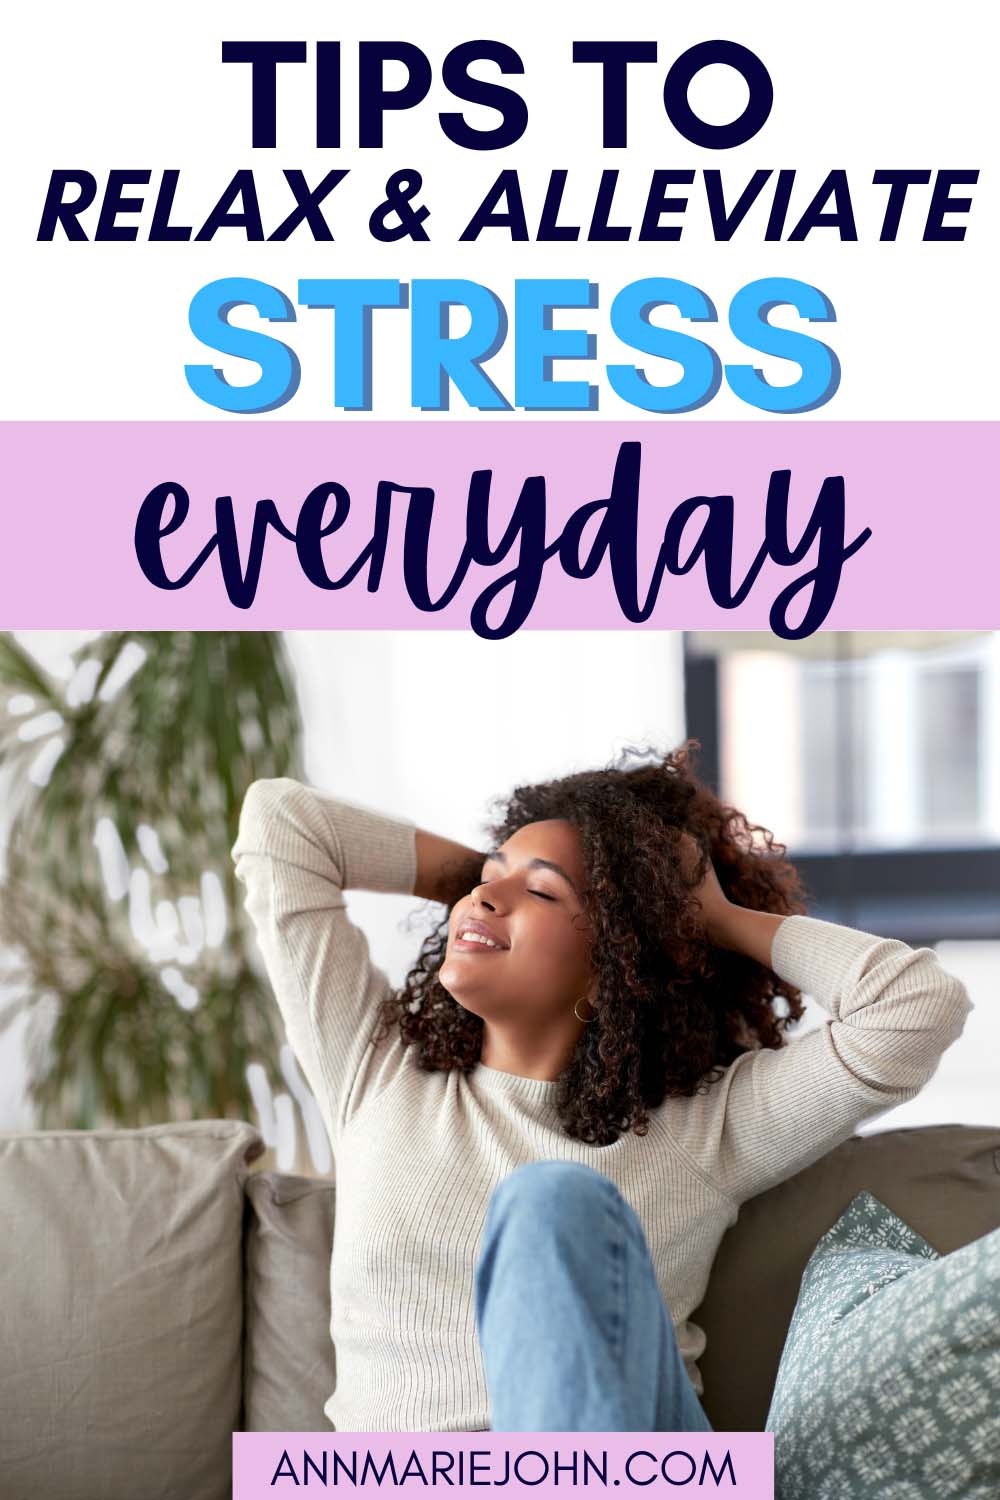 Tips To Relax And Alleviate Stress